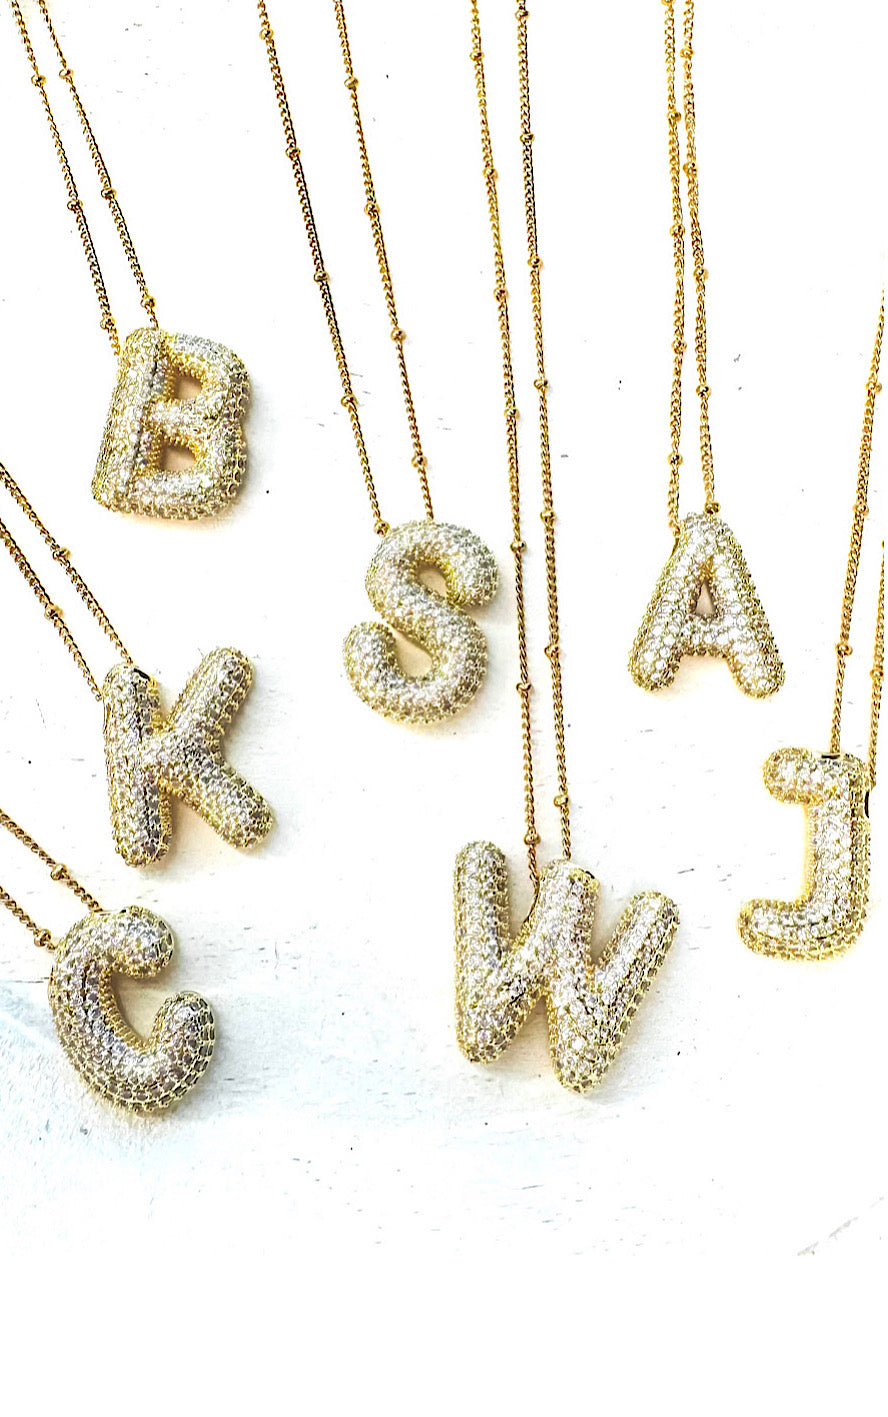 RESTOCKED! Dazzling Diamonds Bubble Letter Necklace, BUY 3 ONE FREE!